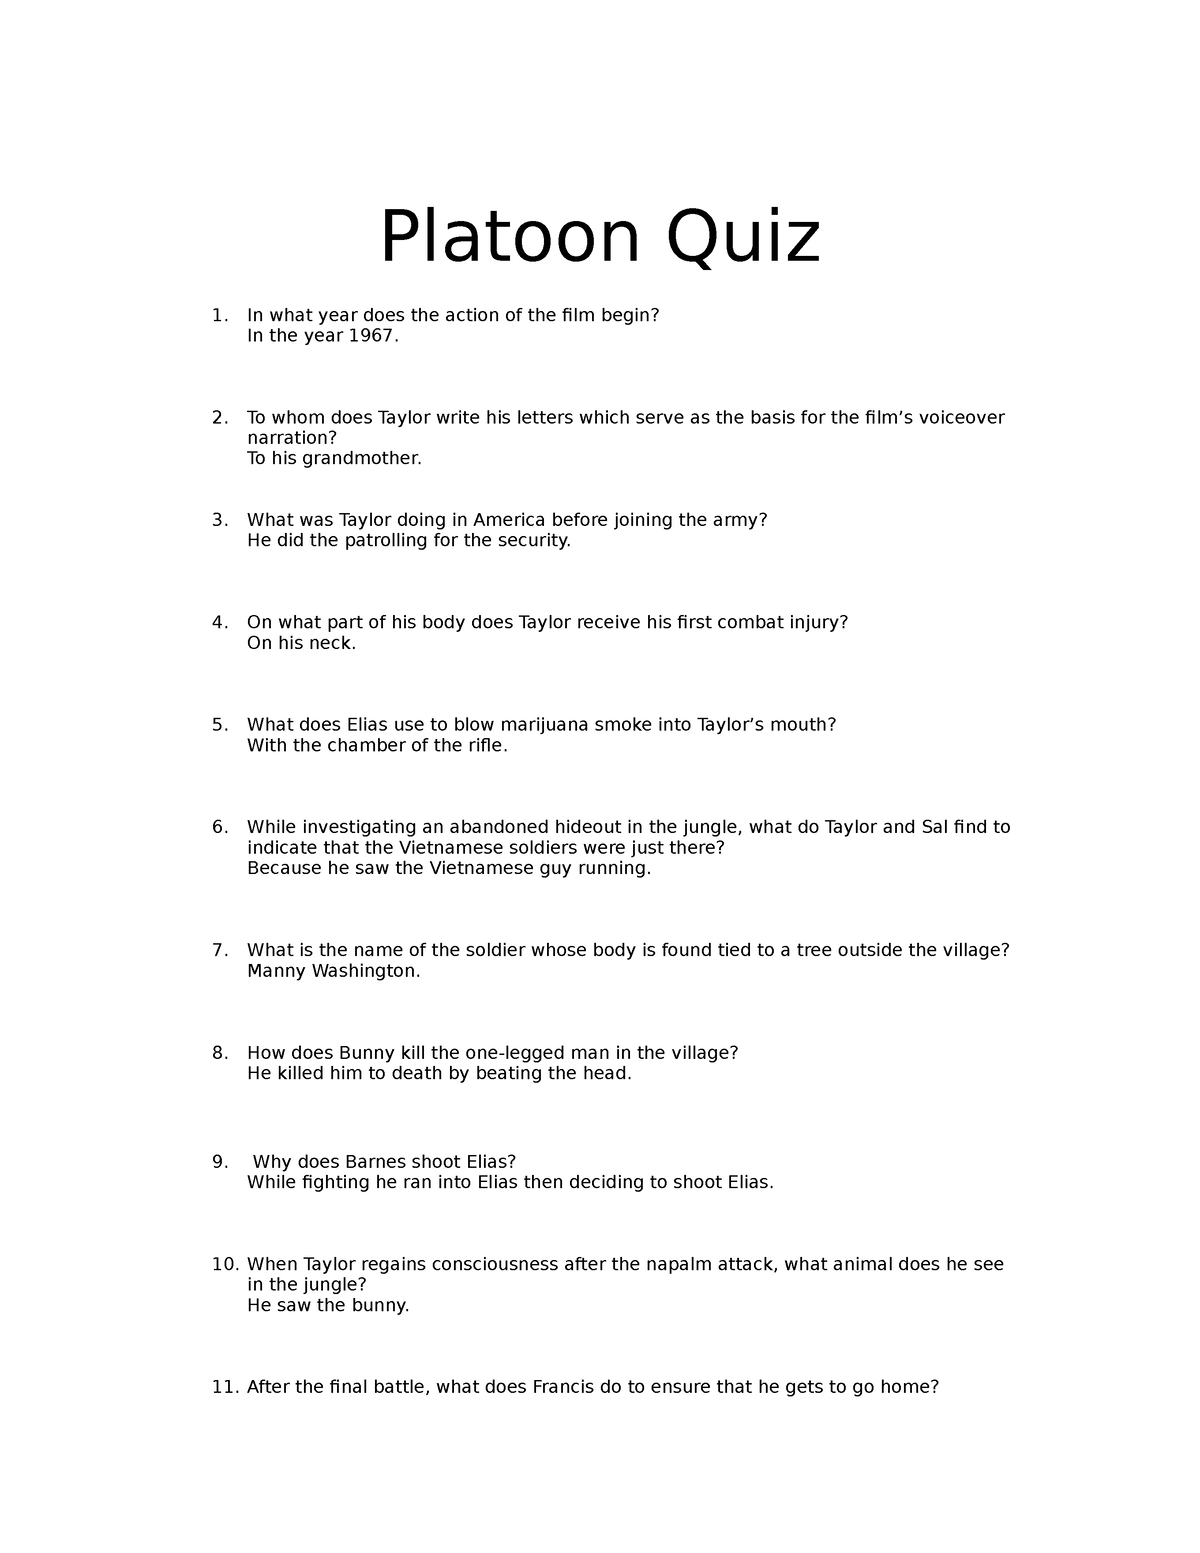 platoon-quiz-weekly-quiz-platoon-quiz-in-what-year-does-the-action